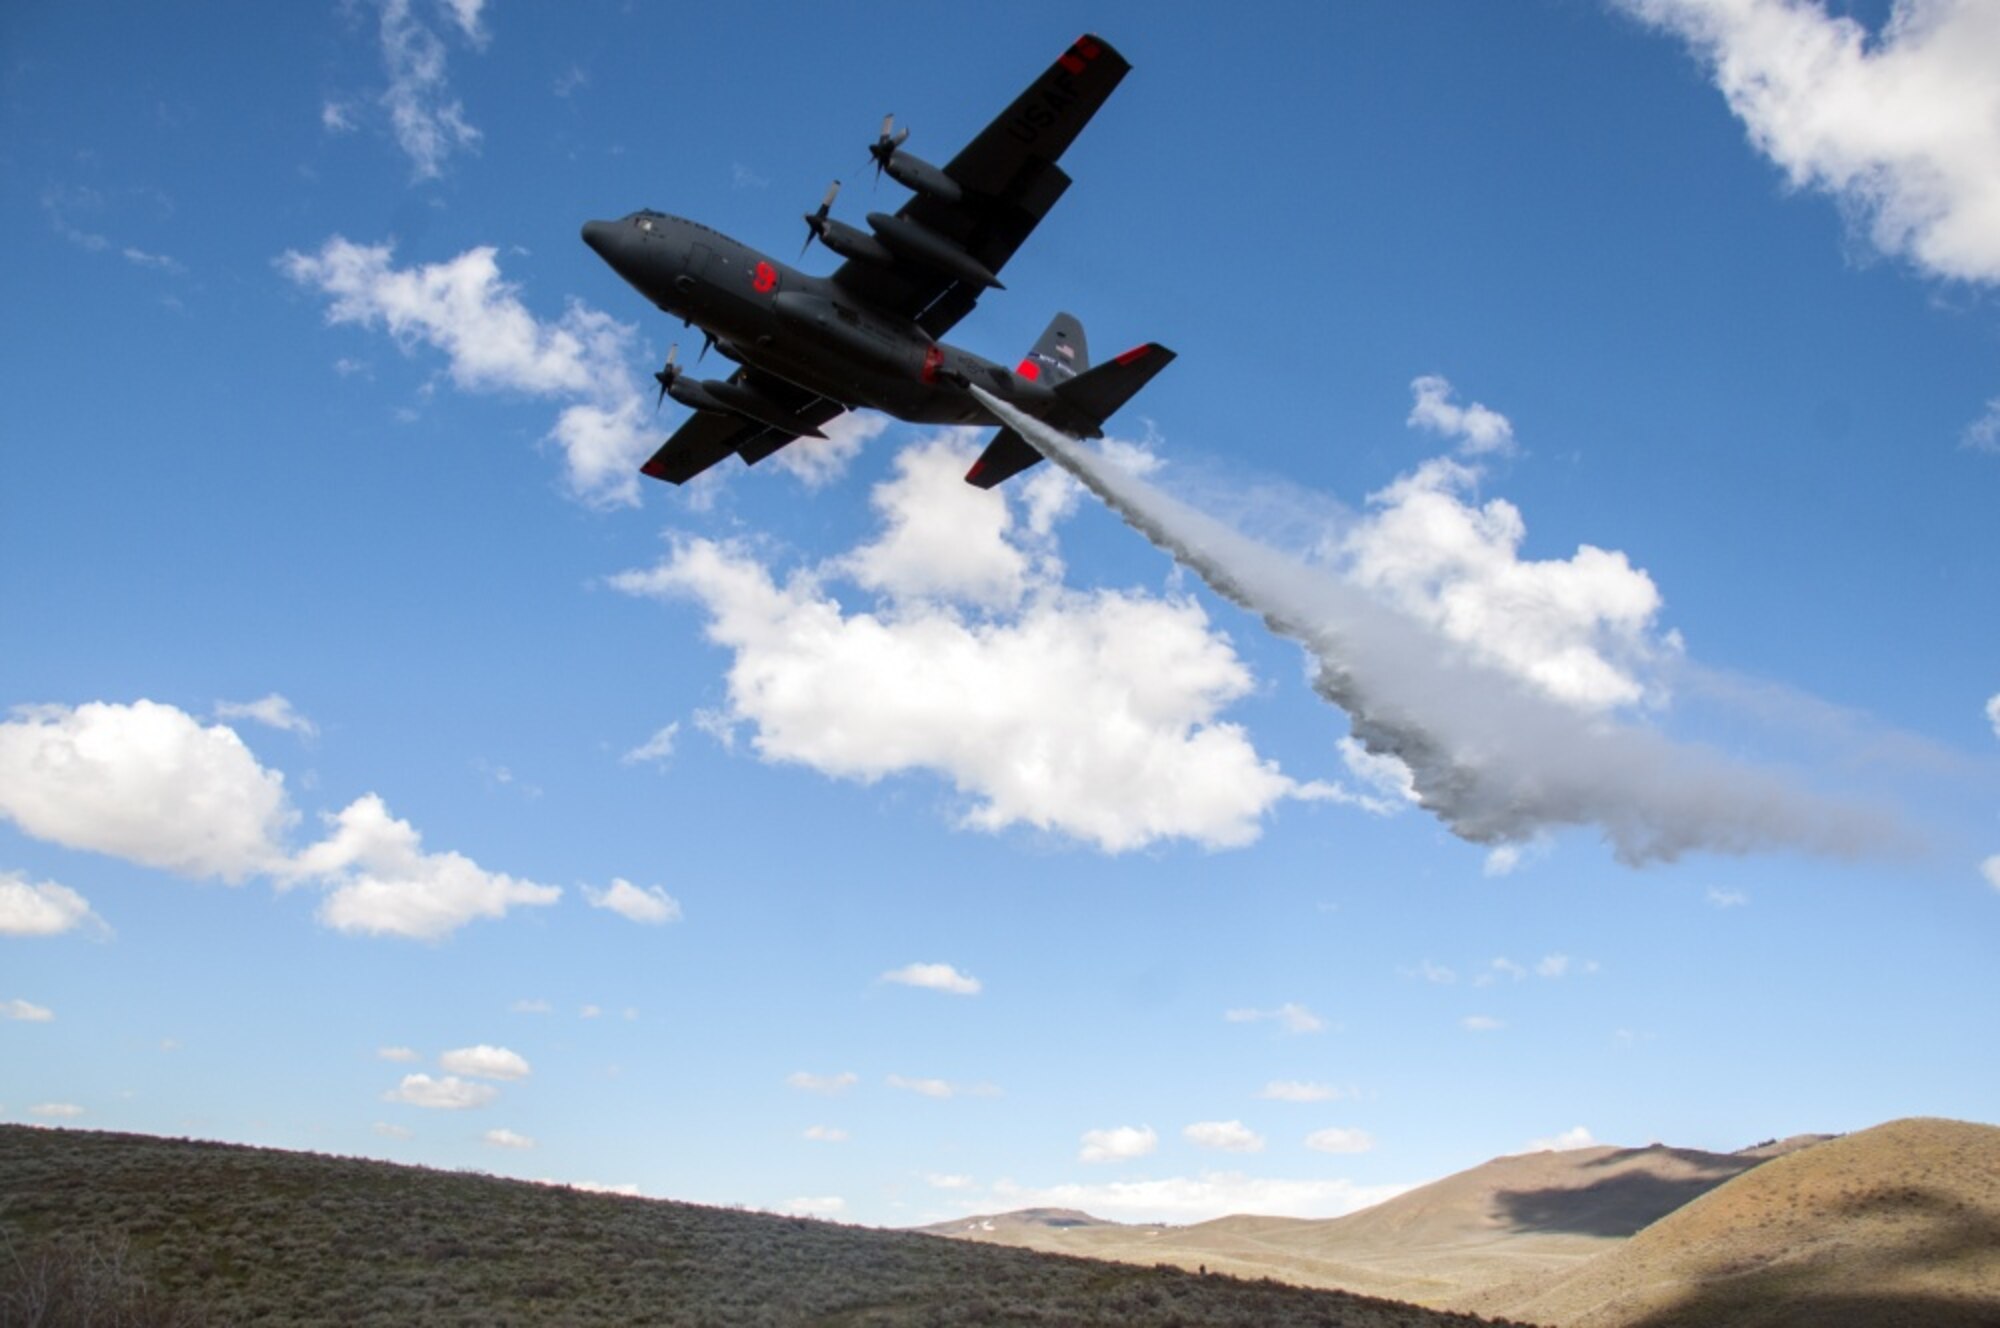 A C-130 with the 152nd Airlift Wing, Nevada Air National Guard, drops water in the mountains east of Boise, Idaho as part of the annual Modular Airborne Fire Fighting System training and certification, April 21, 2017. More than 400 personnel of four C-130 Guard and Reserve units — from California, Colorado, Nevada and Wyoming, making up the Air Expeditionary Group — are in Boise for the week-long wildfire training and certification sponsored by the U.S. Forest Service. (U.S. Air Force photo by Tech. Sgt. Emerson Marcus)

